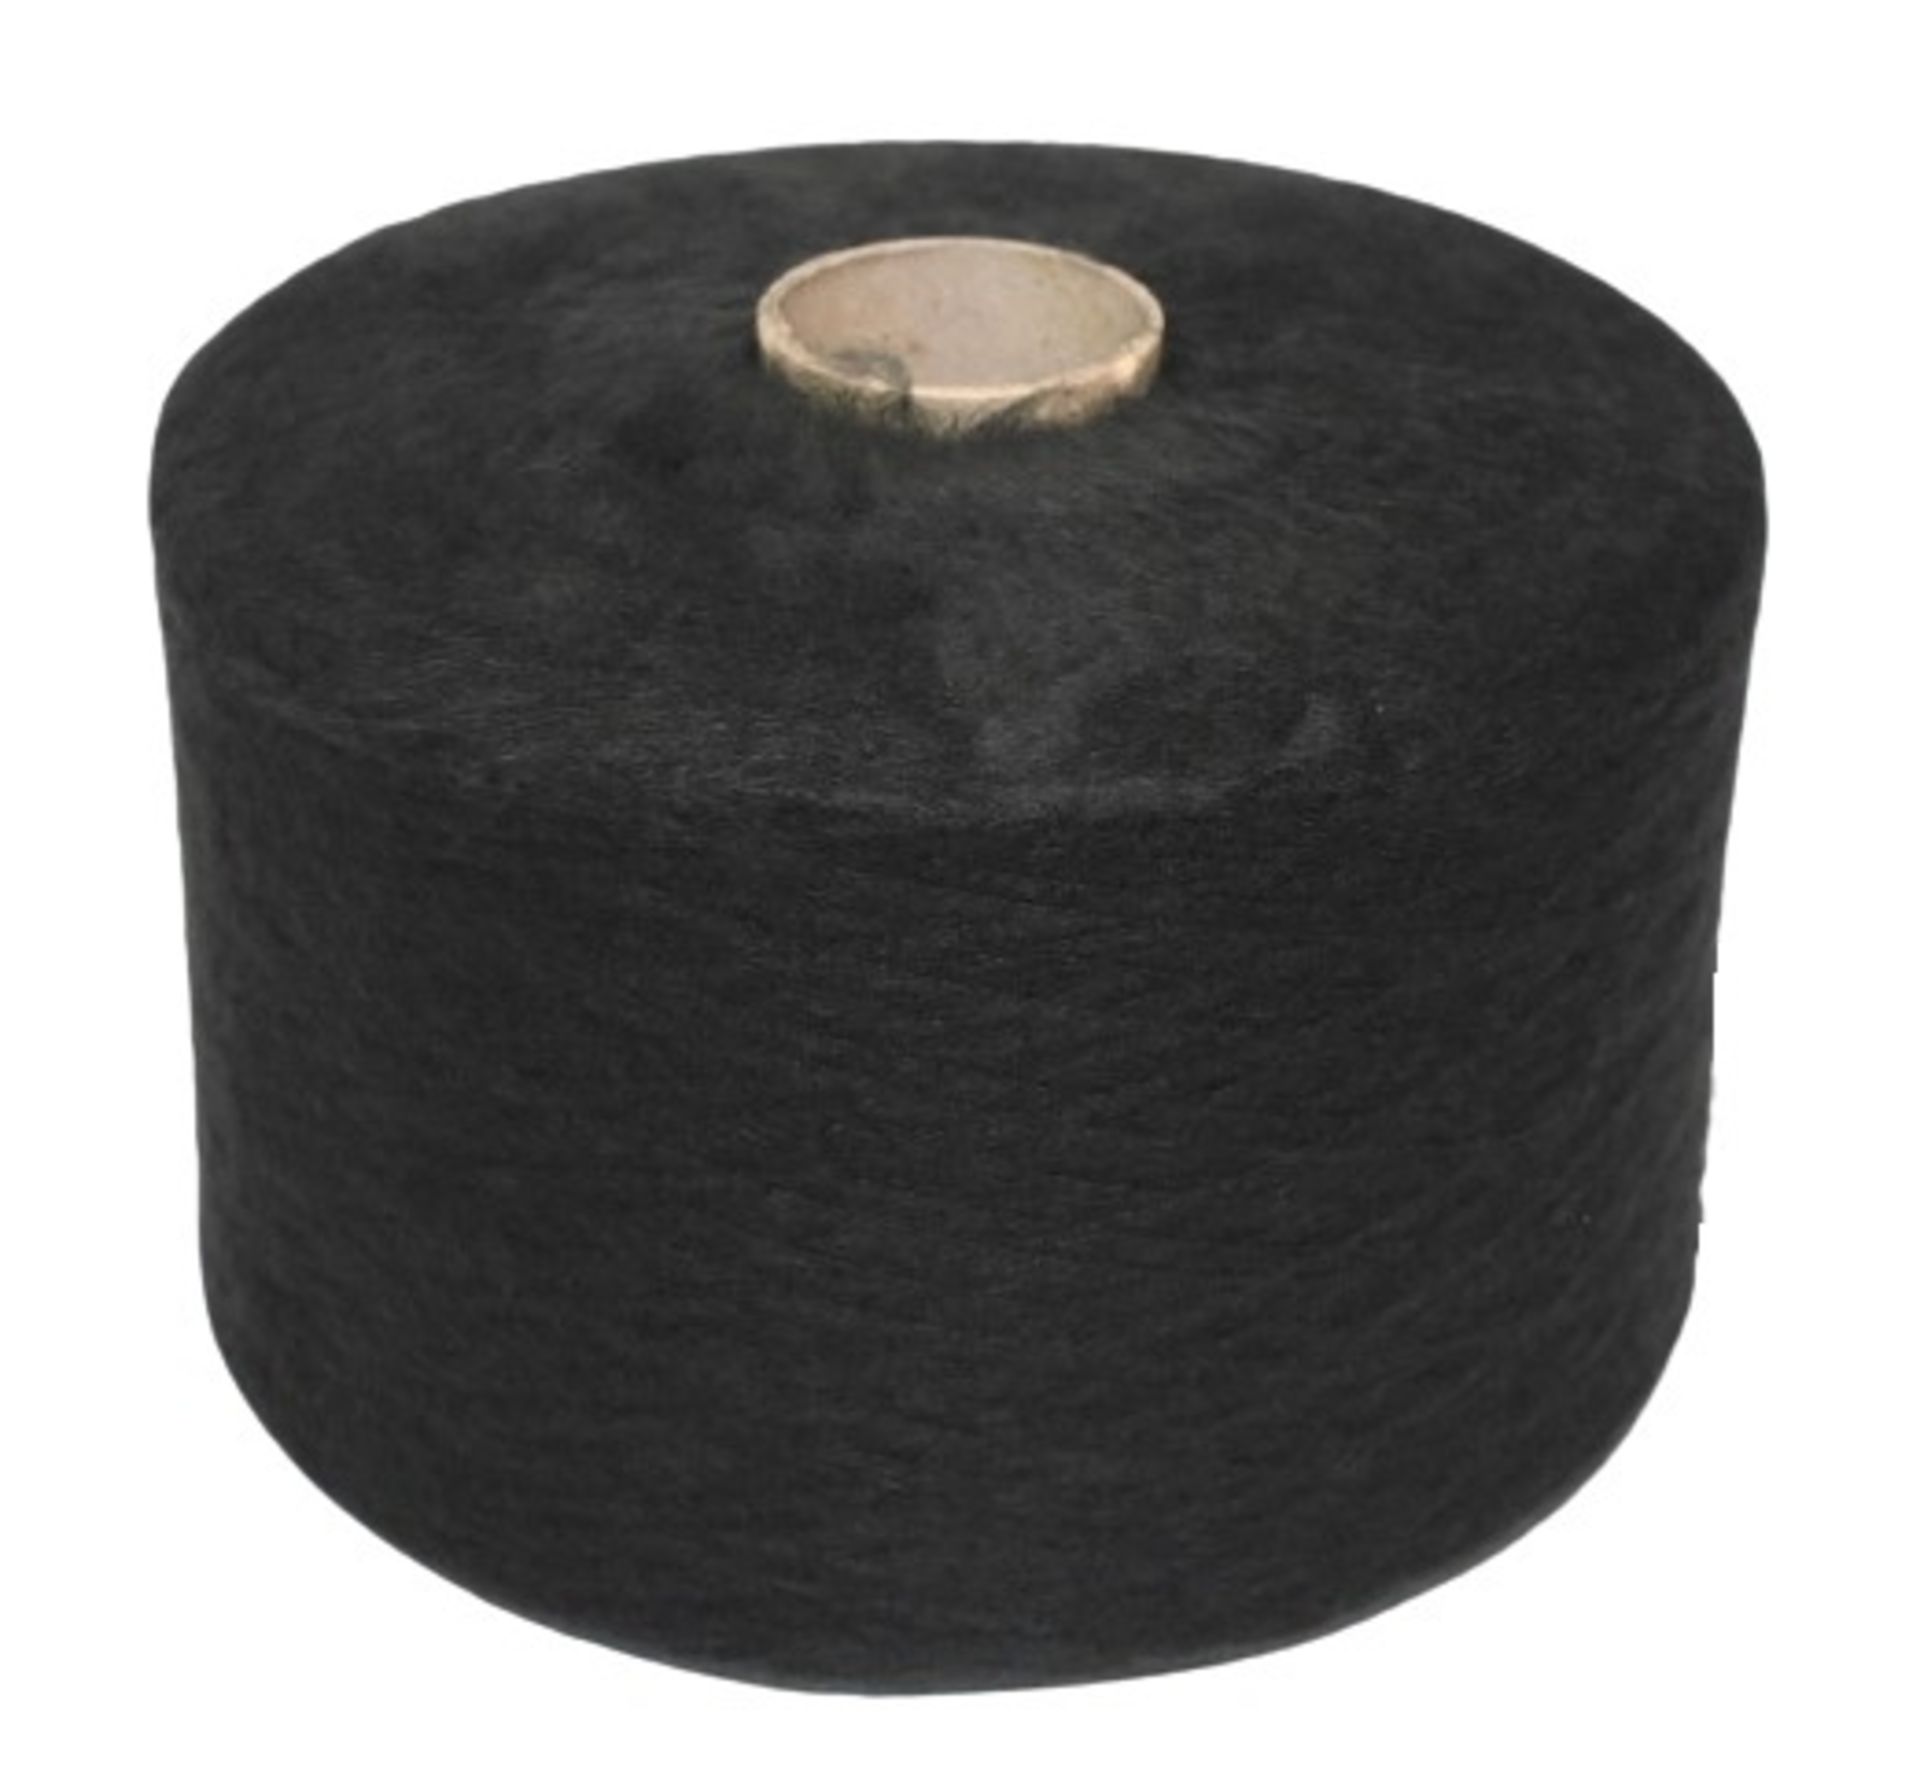 12 x Cones of 1/7,5 Lagona Knitting Yarn - Charcoal - Approx Weight: 2,300g - New Stock ABL Yarn - Image 3 of 11